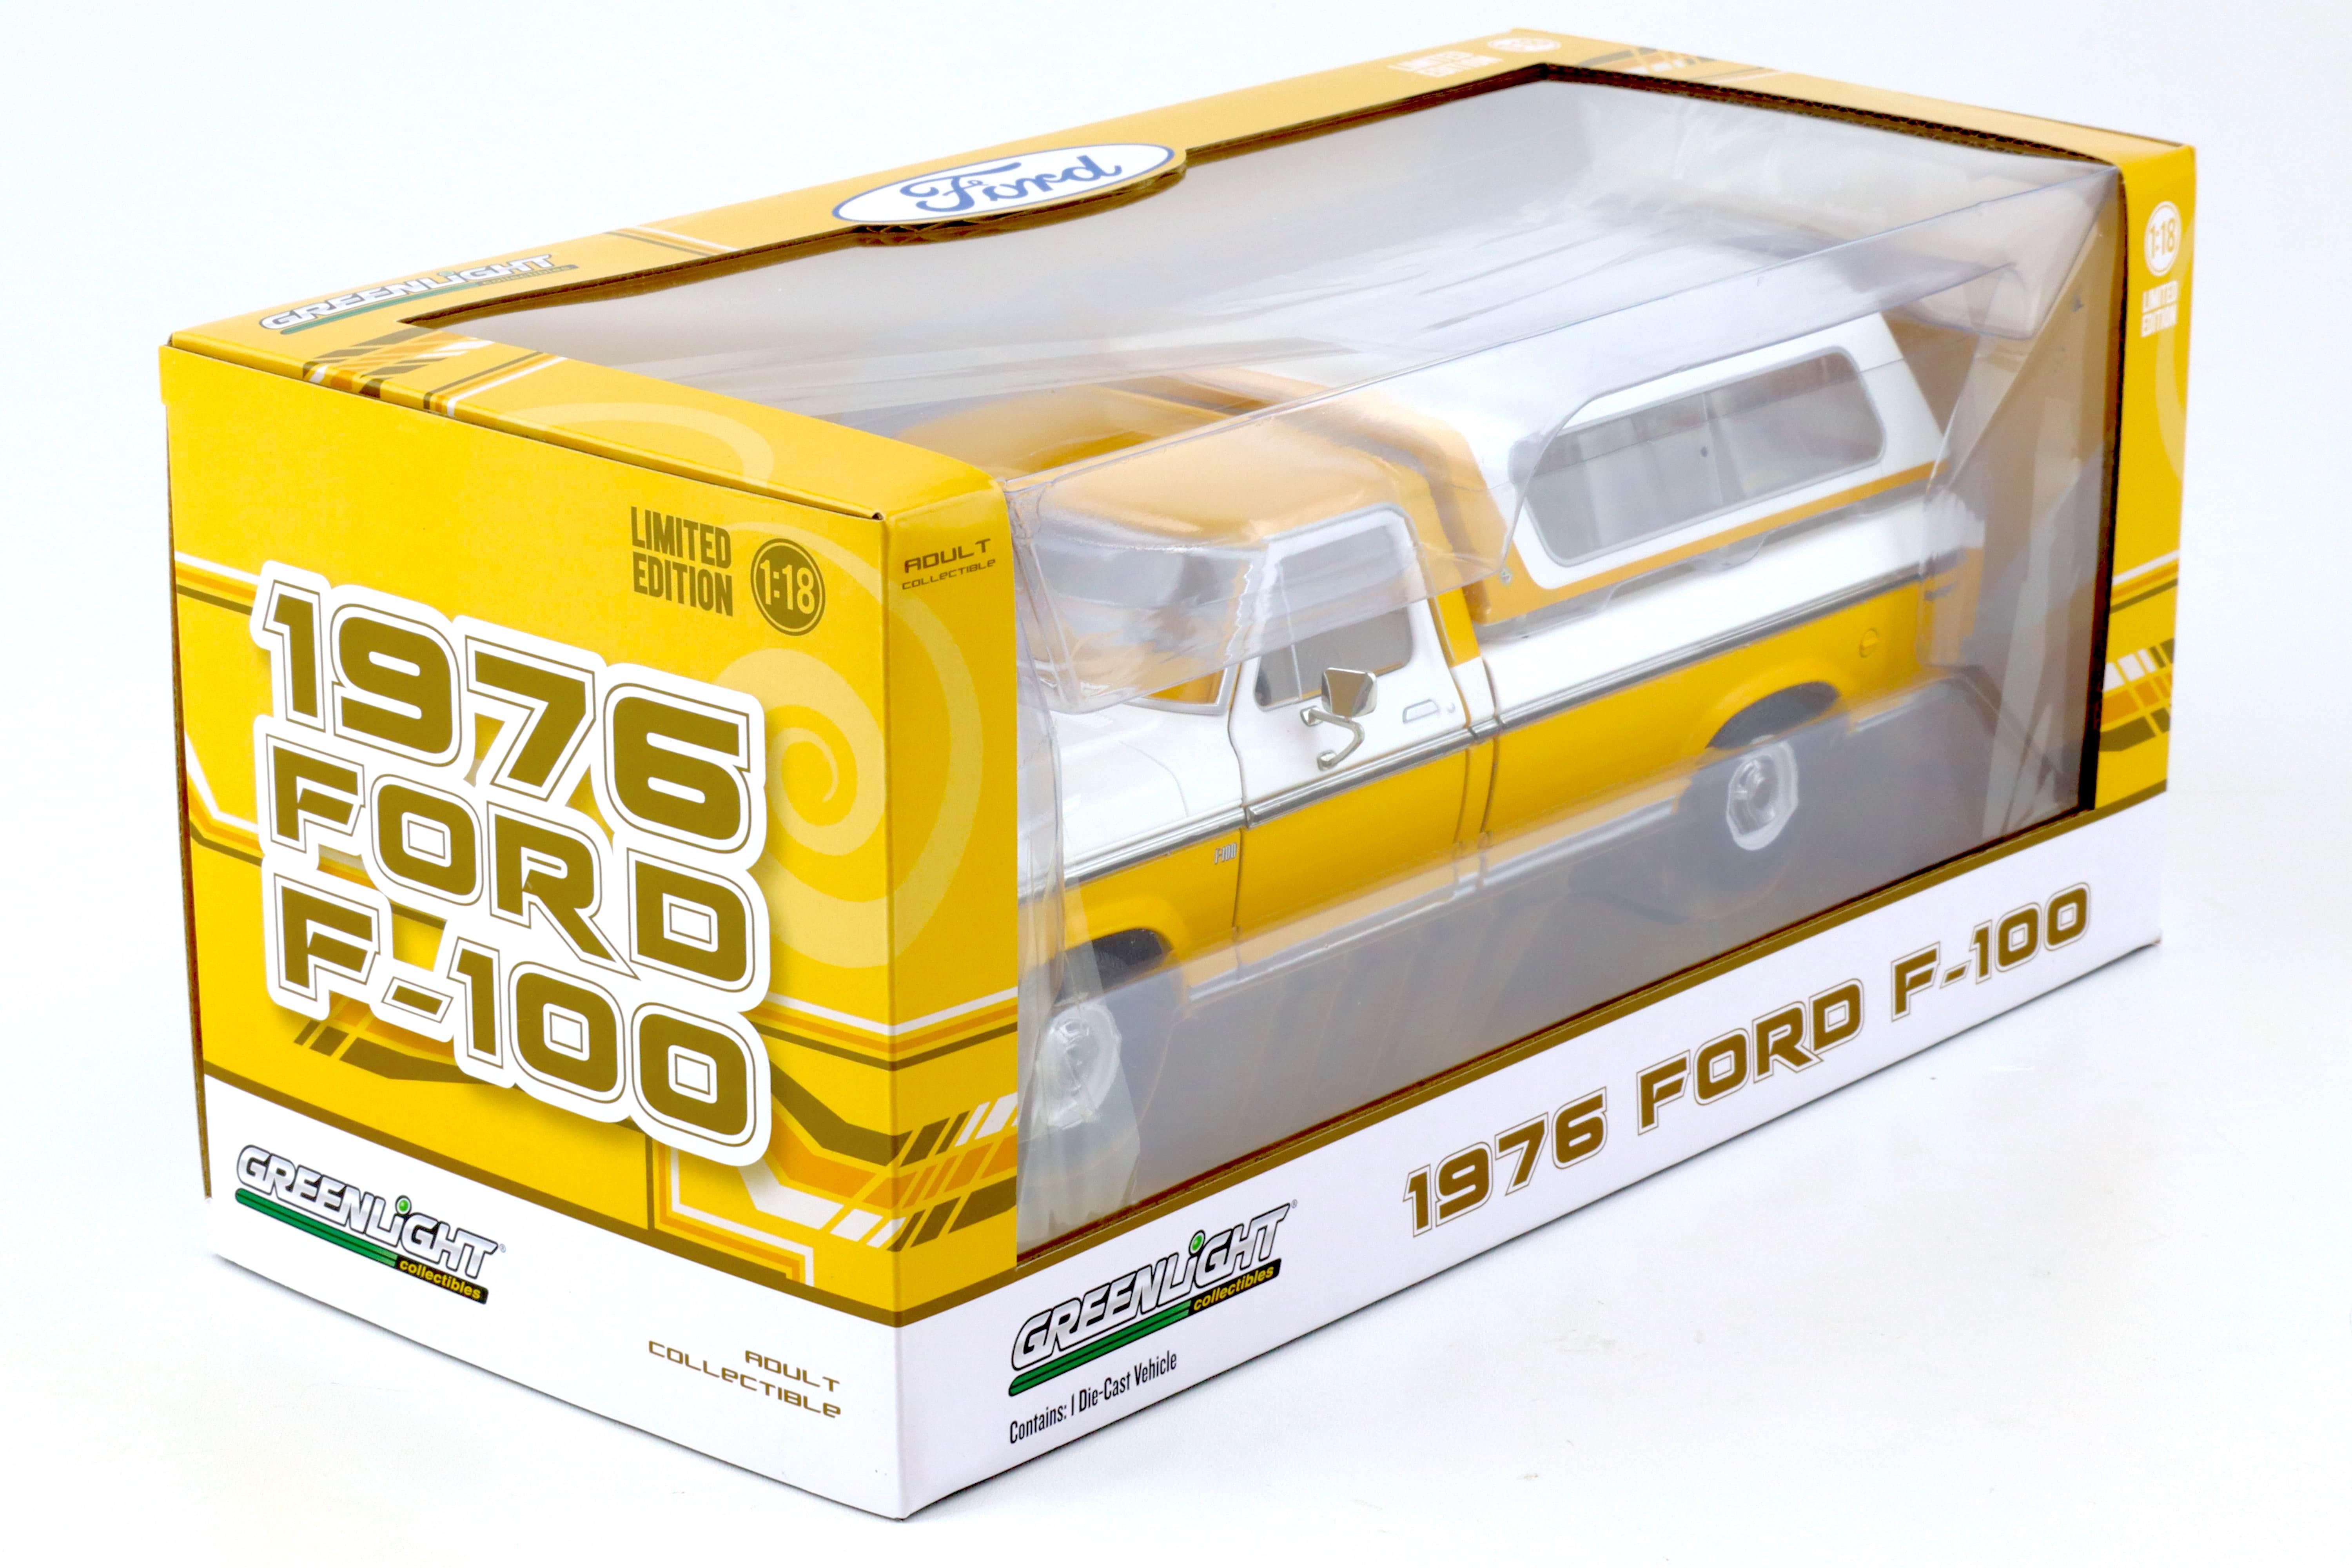 1:18 Greenlight 1976 Ford F-100 Pick Up with removable Hardtop white/ yellow